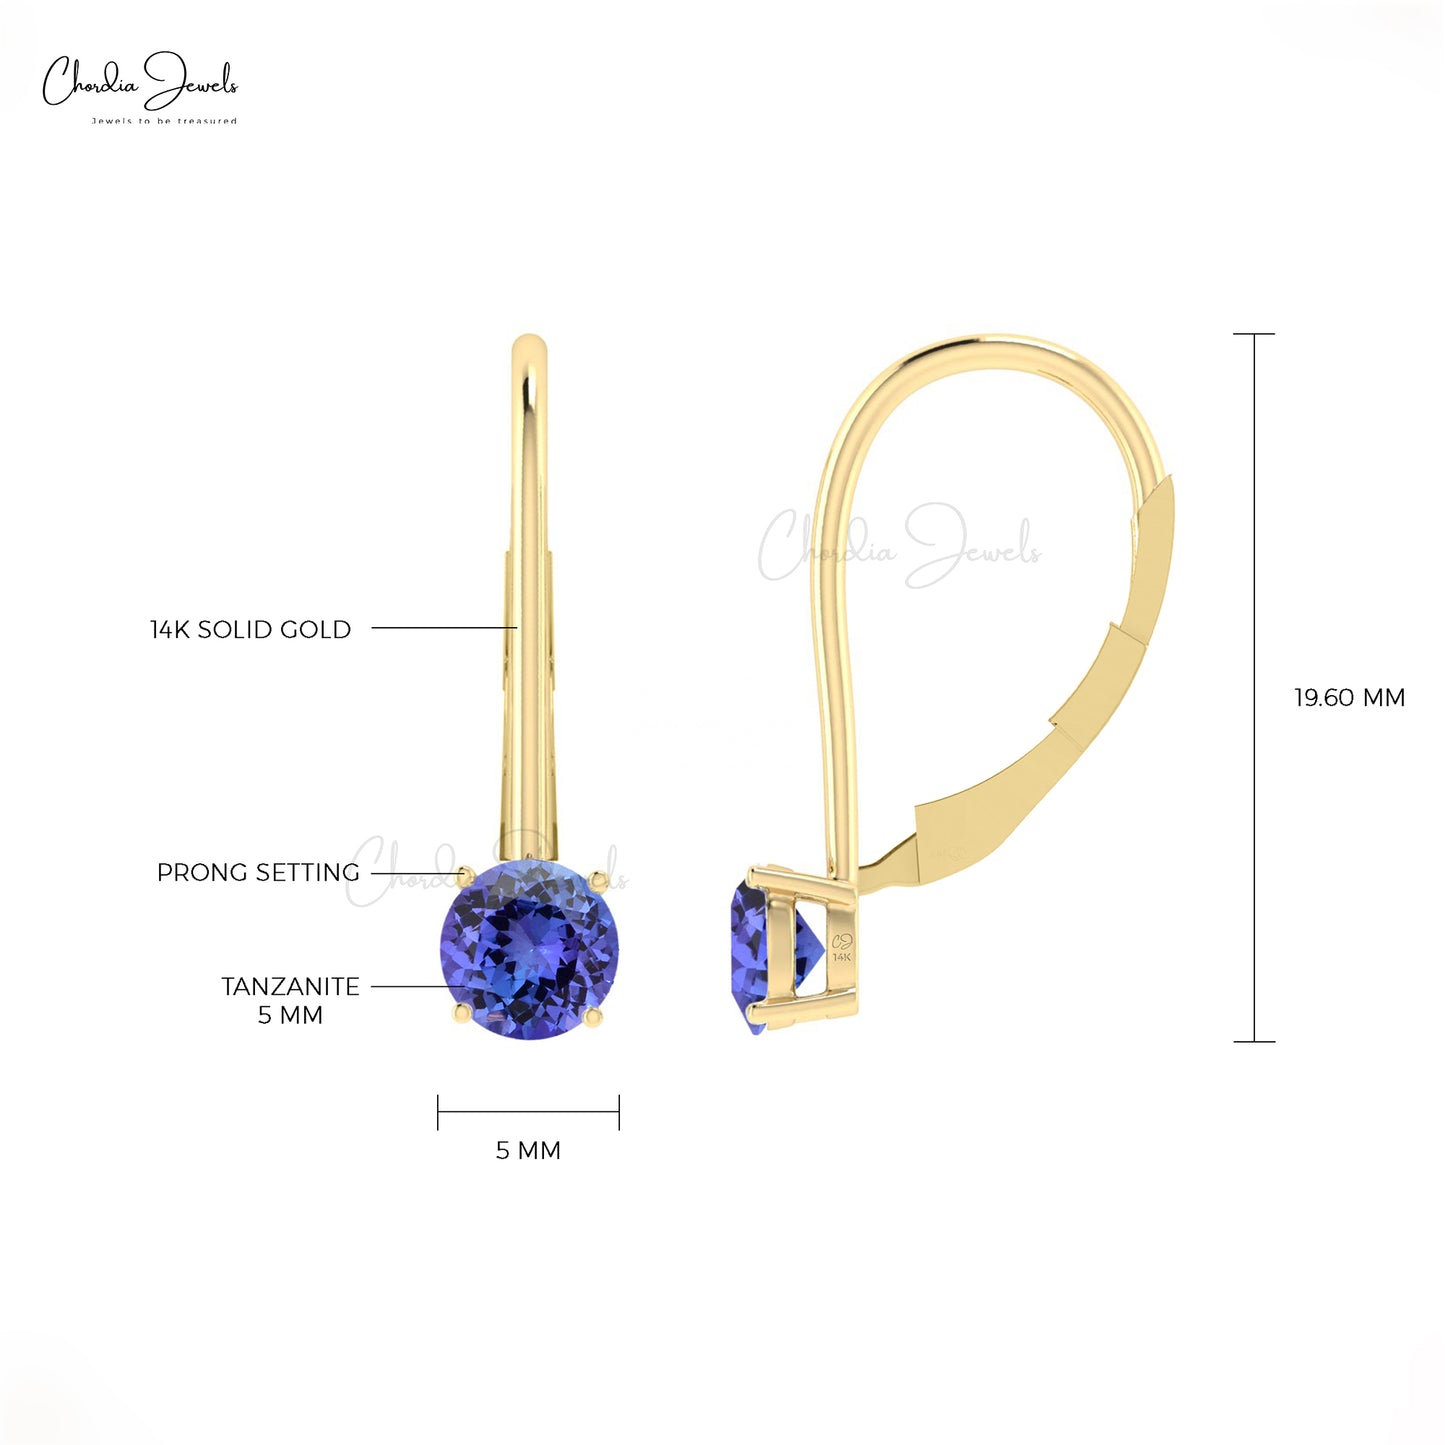 Load image into Gallery viewer, AAA Quality 0.98 Ct December Birthstone Gemstone Genuine Tanzanite Dangling Earrings 14k Solid Gold Prong Set Hallmarked Jewelry For Women
